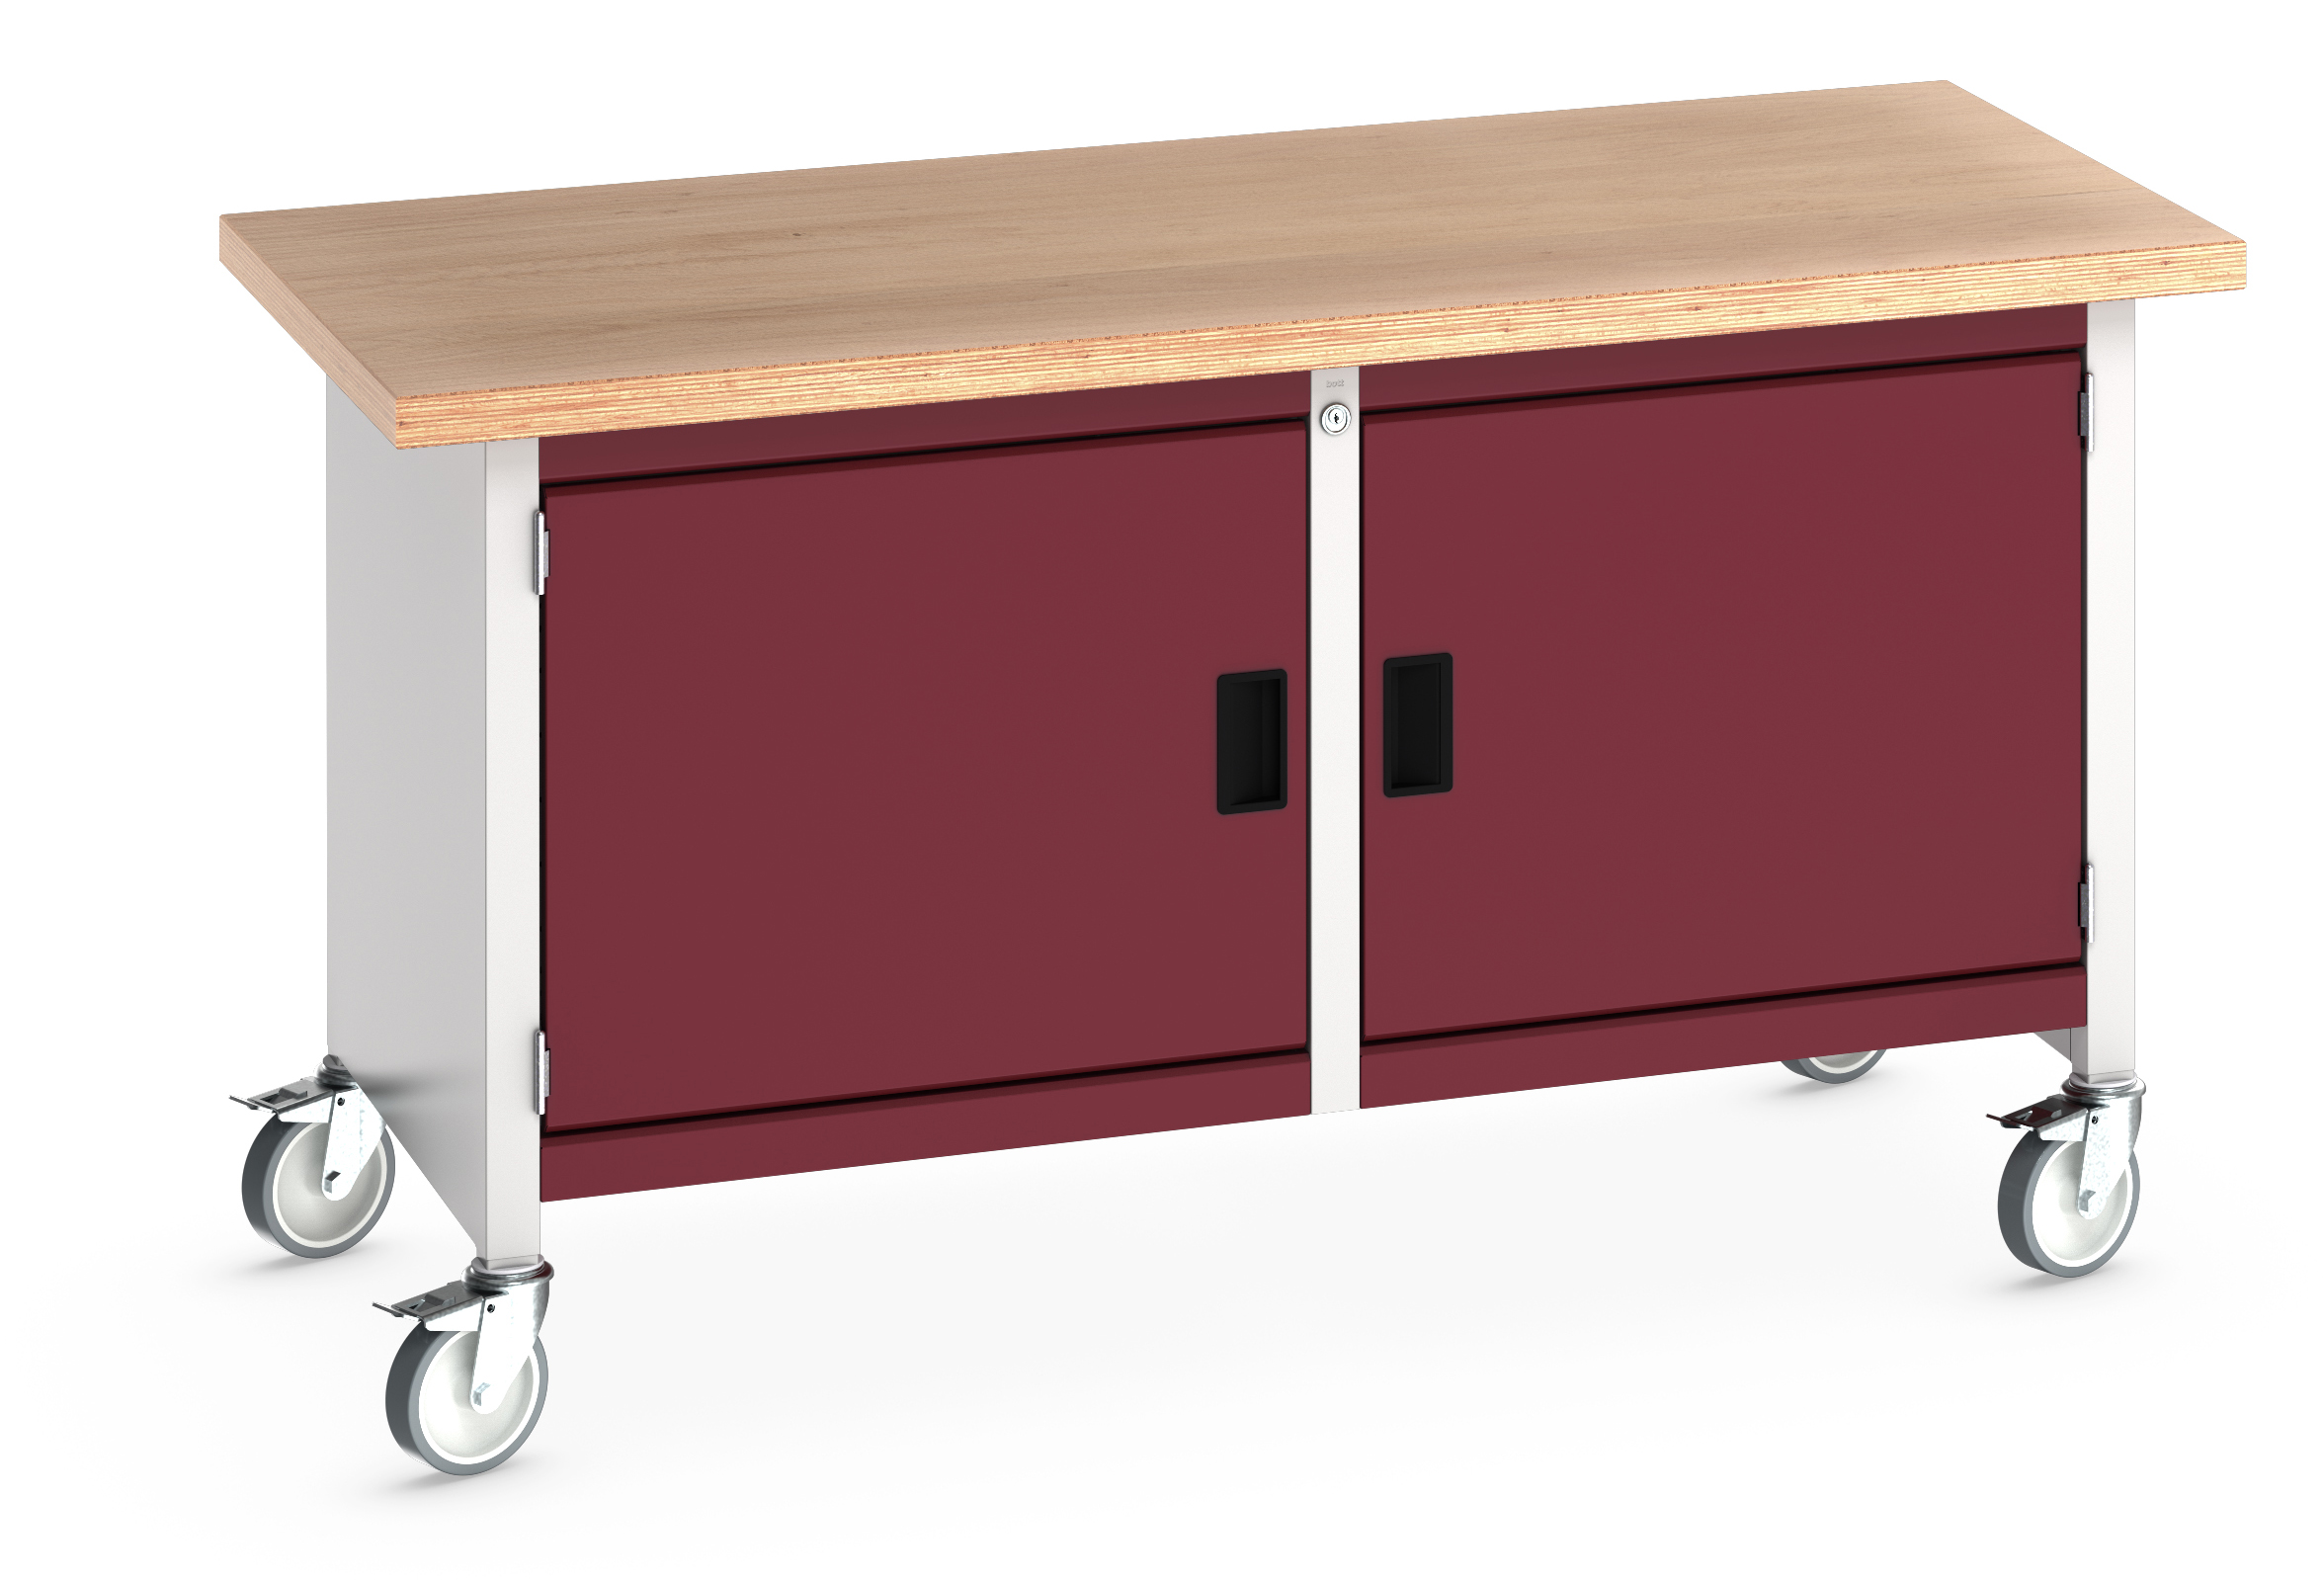 Bott Cubio Mobile Storage Bench With Full Cupboard / Full Cupboard - 41002097.24V